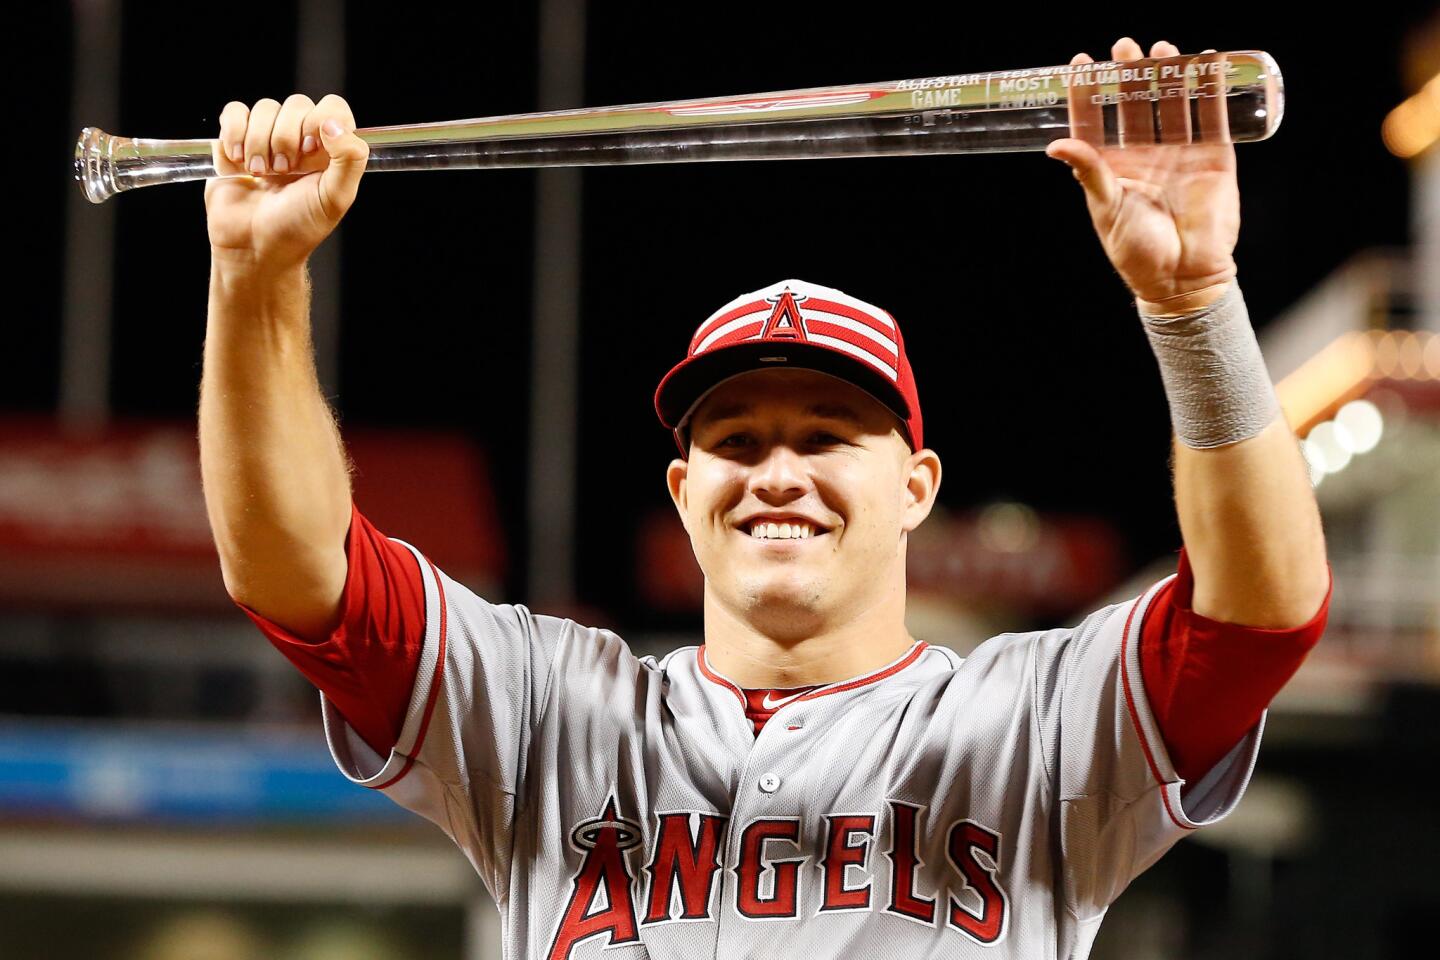 American League All-Star Mike Trout poses with the MVP trophy after defeating the National League 6-3.